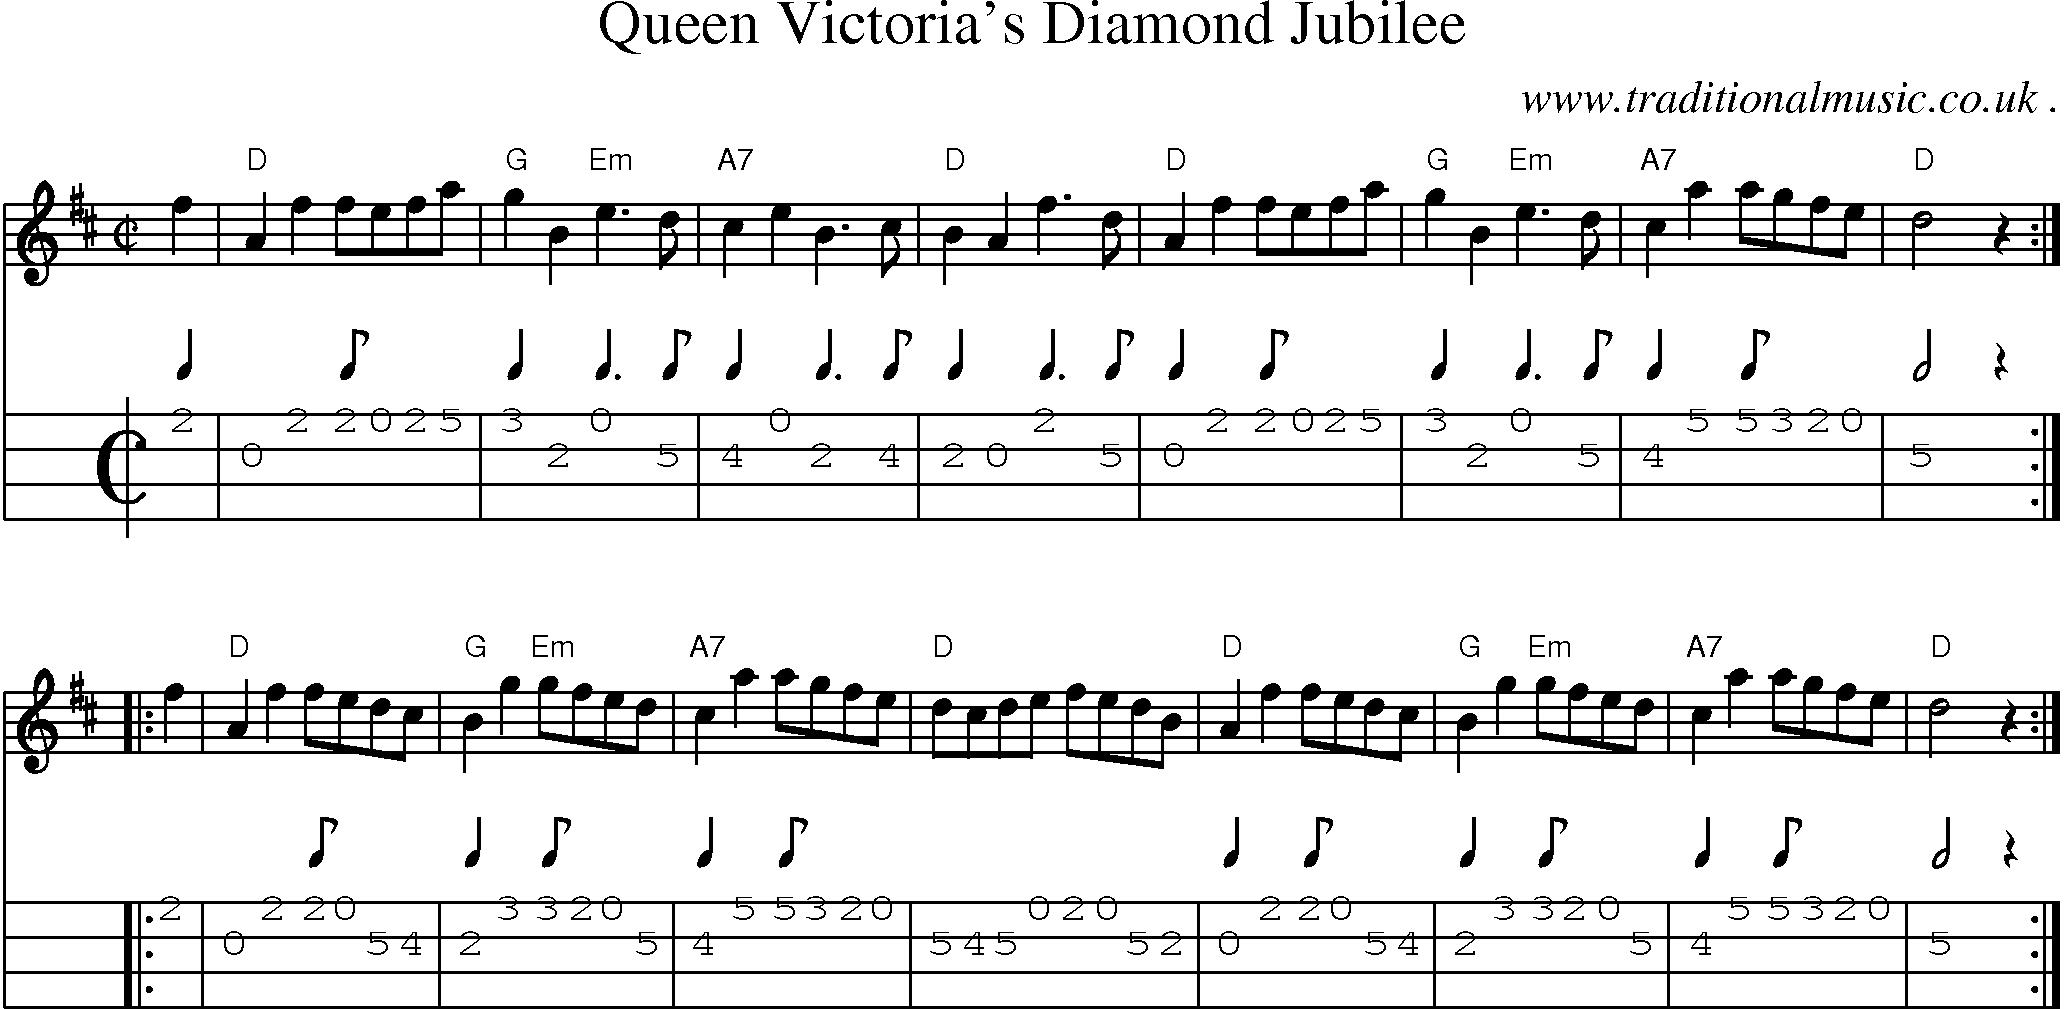 Sheet-music  score, Chords and Mandolin Tabs for Queen Victorias Diamond Jubilee